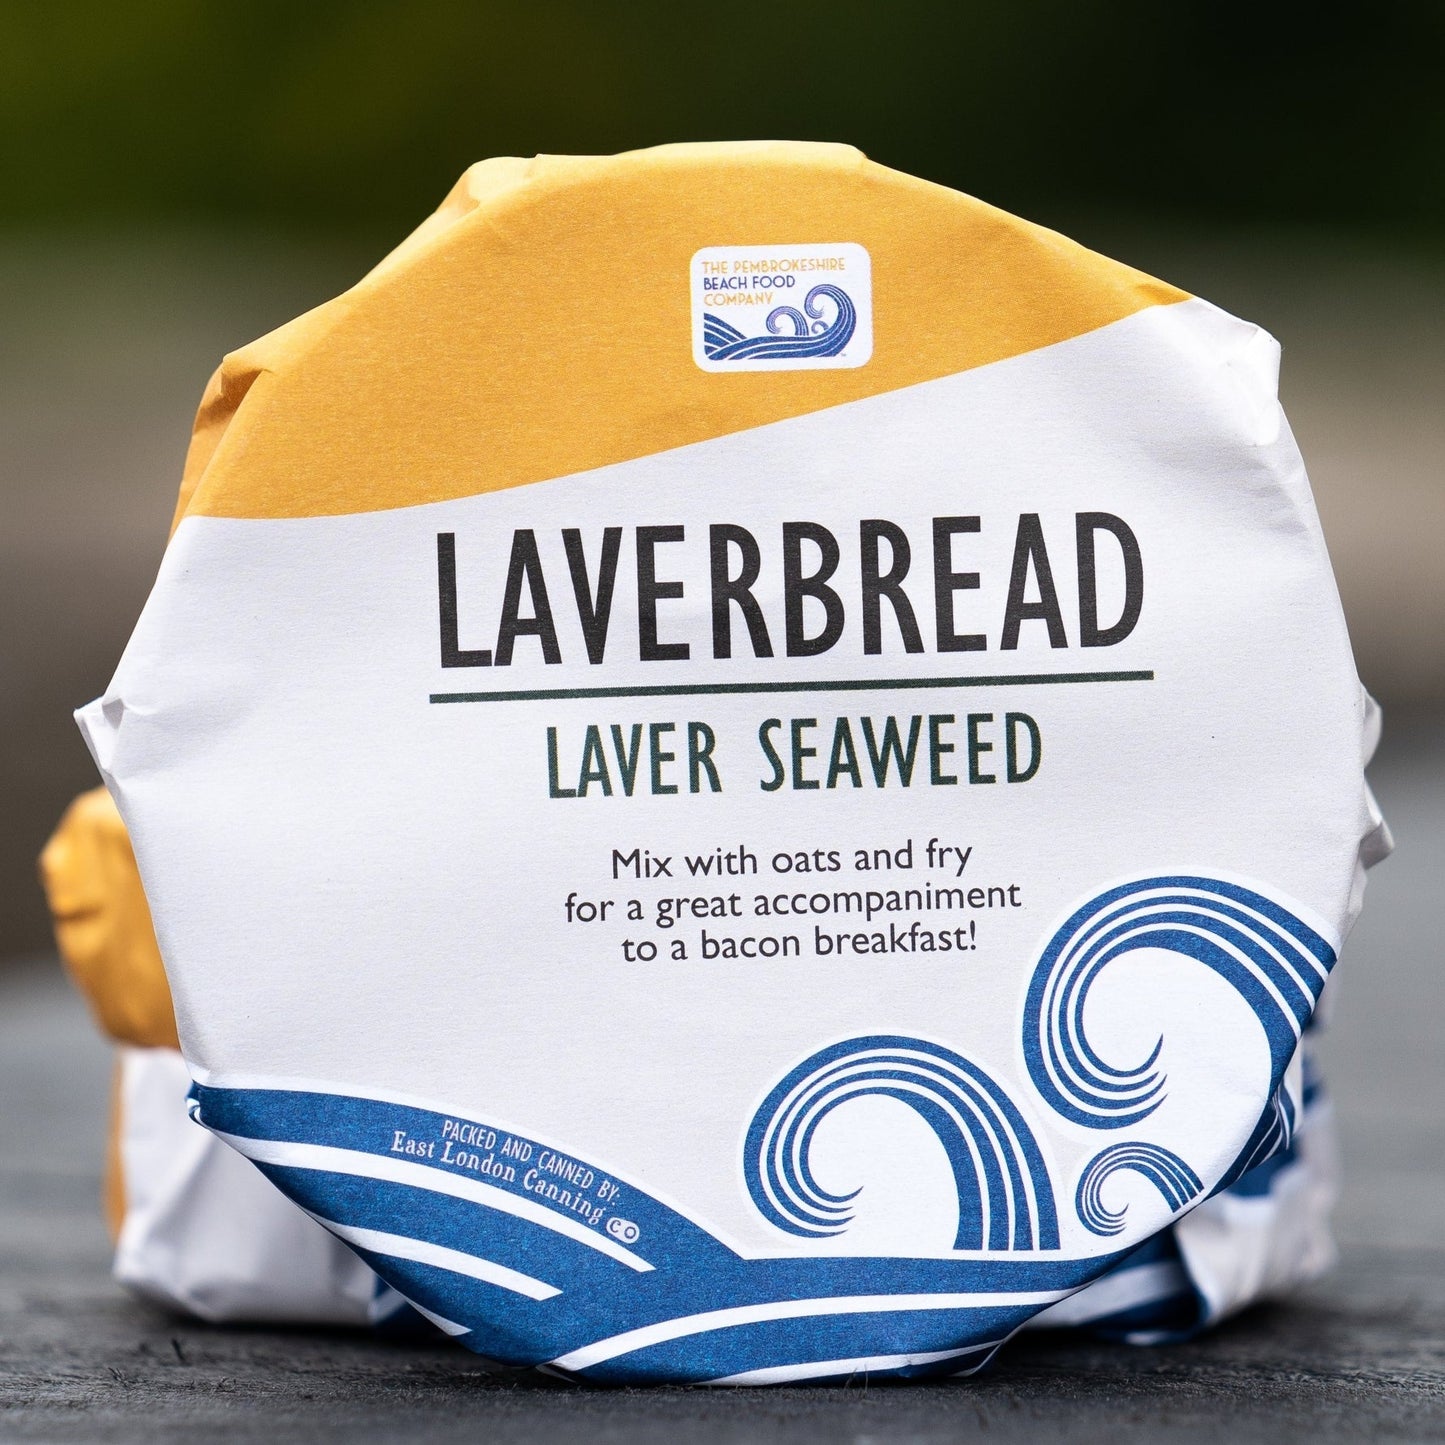 Luxury Canned Laver bread